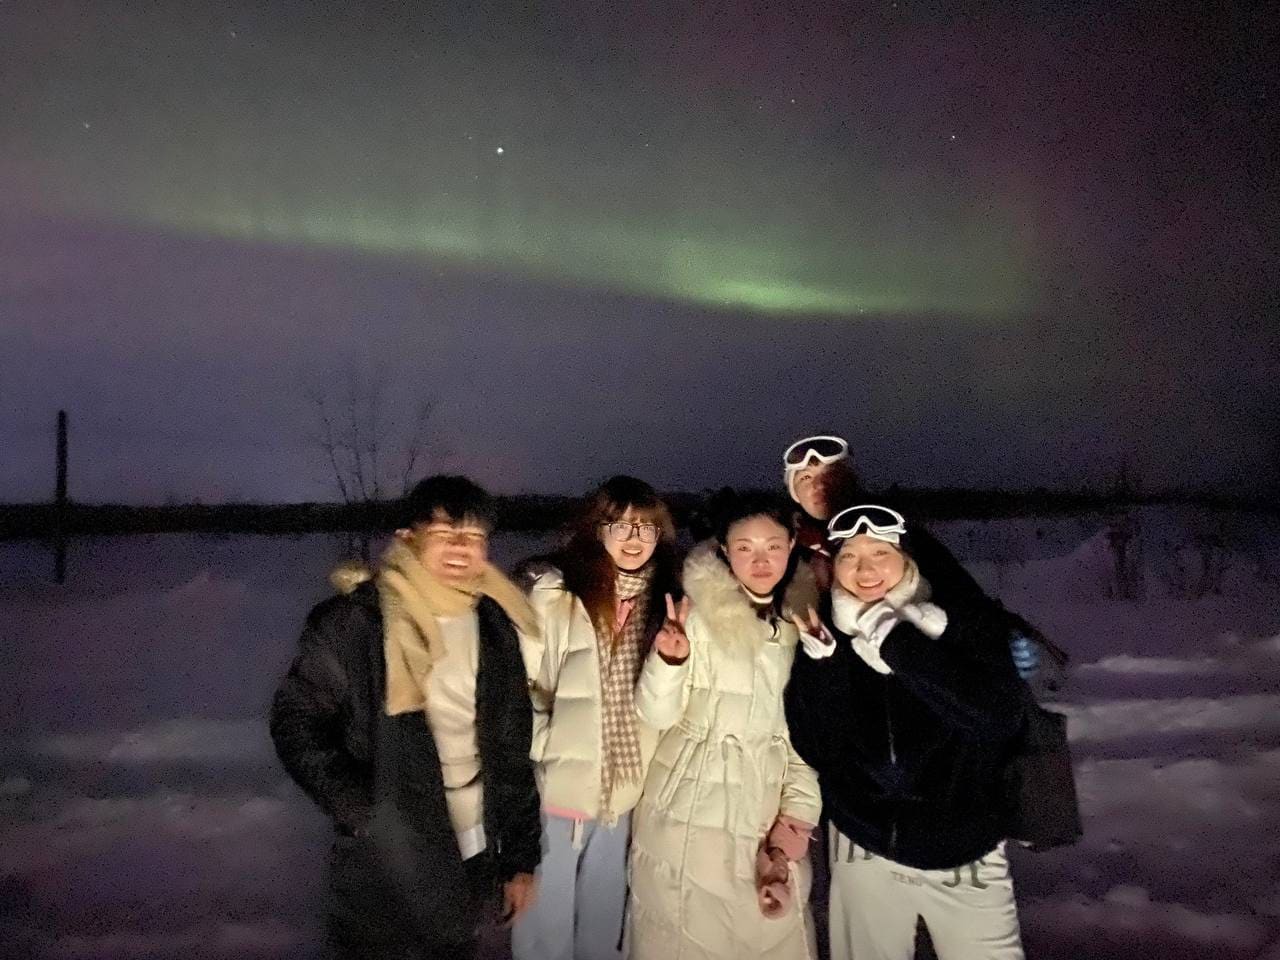 WUIC Exchange students in Russia see the Aurora for the first time